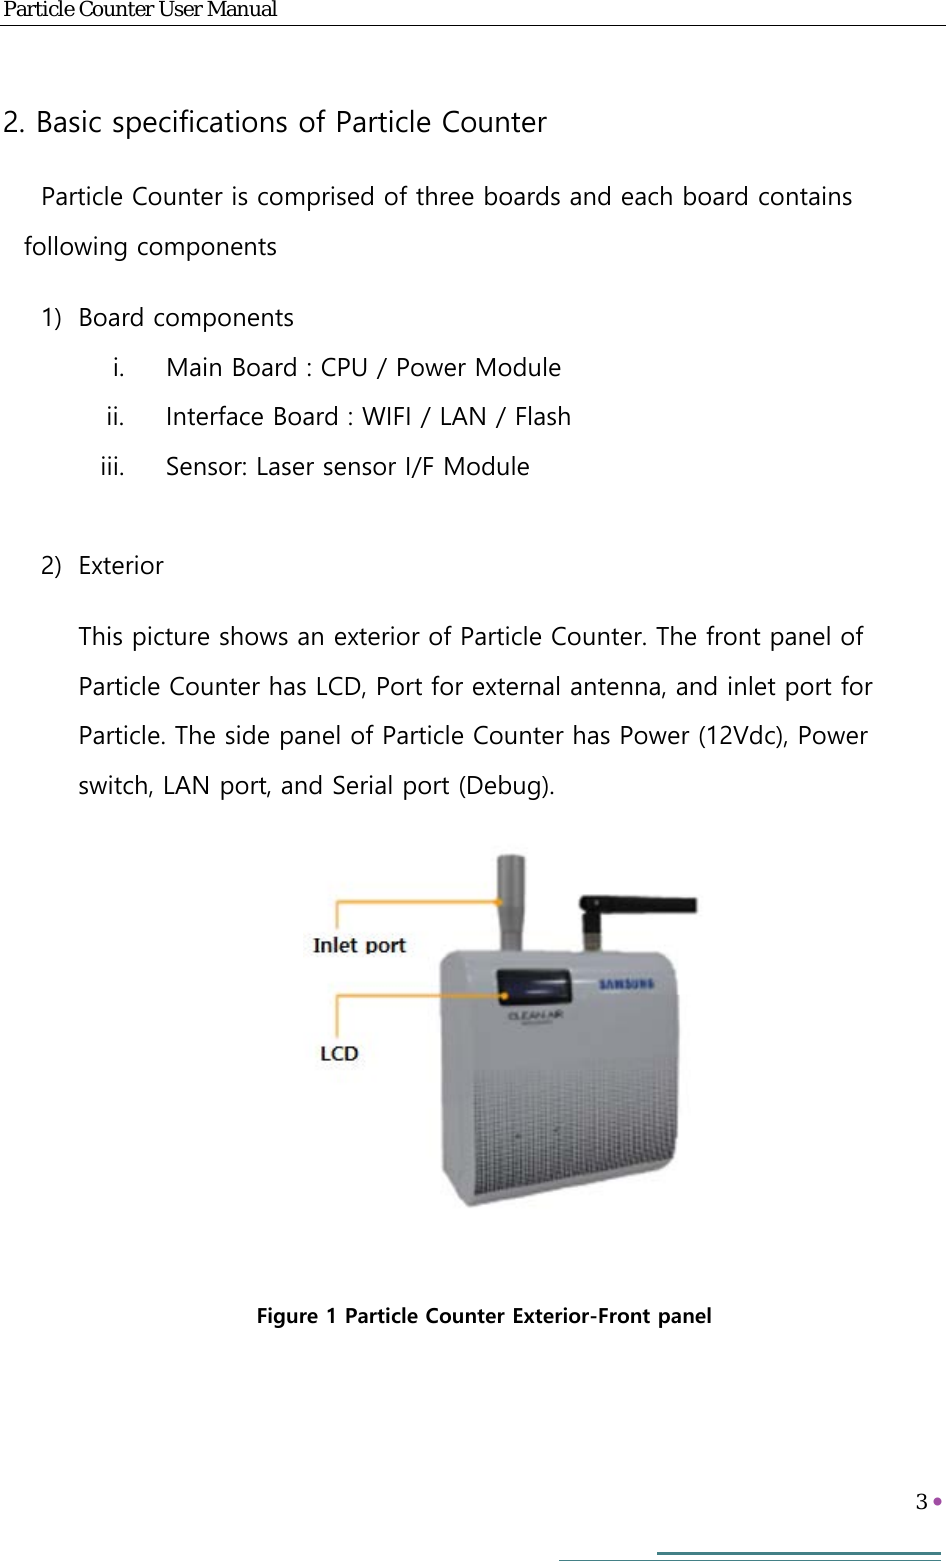 Particle Counter User Manual   3     2. Basic specifications of Particle Counter Particle Counter is comprised of three boards and each board contains following components 1) Board components i. Main Board : CPU / Power Module ii. Interface Board : WIFI / LAN / Flash iii. Sensor: Laser sensor I/F Module   2) Exterior This picture shows an exterior of Particle Counter. The front panel of Particle Counter has LCD, Port for external antenna, and inlet port for Particle. The side panel of Particle Counter has Power (12Vdc), Power switch, LAN port, and Serial port (Debug).   Figure 1 Particle Counter Exterior-Front panel 